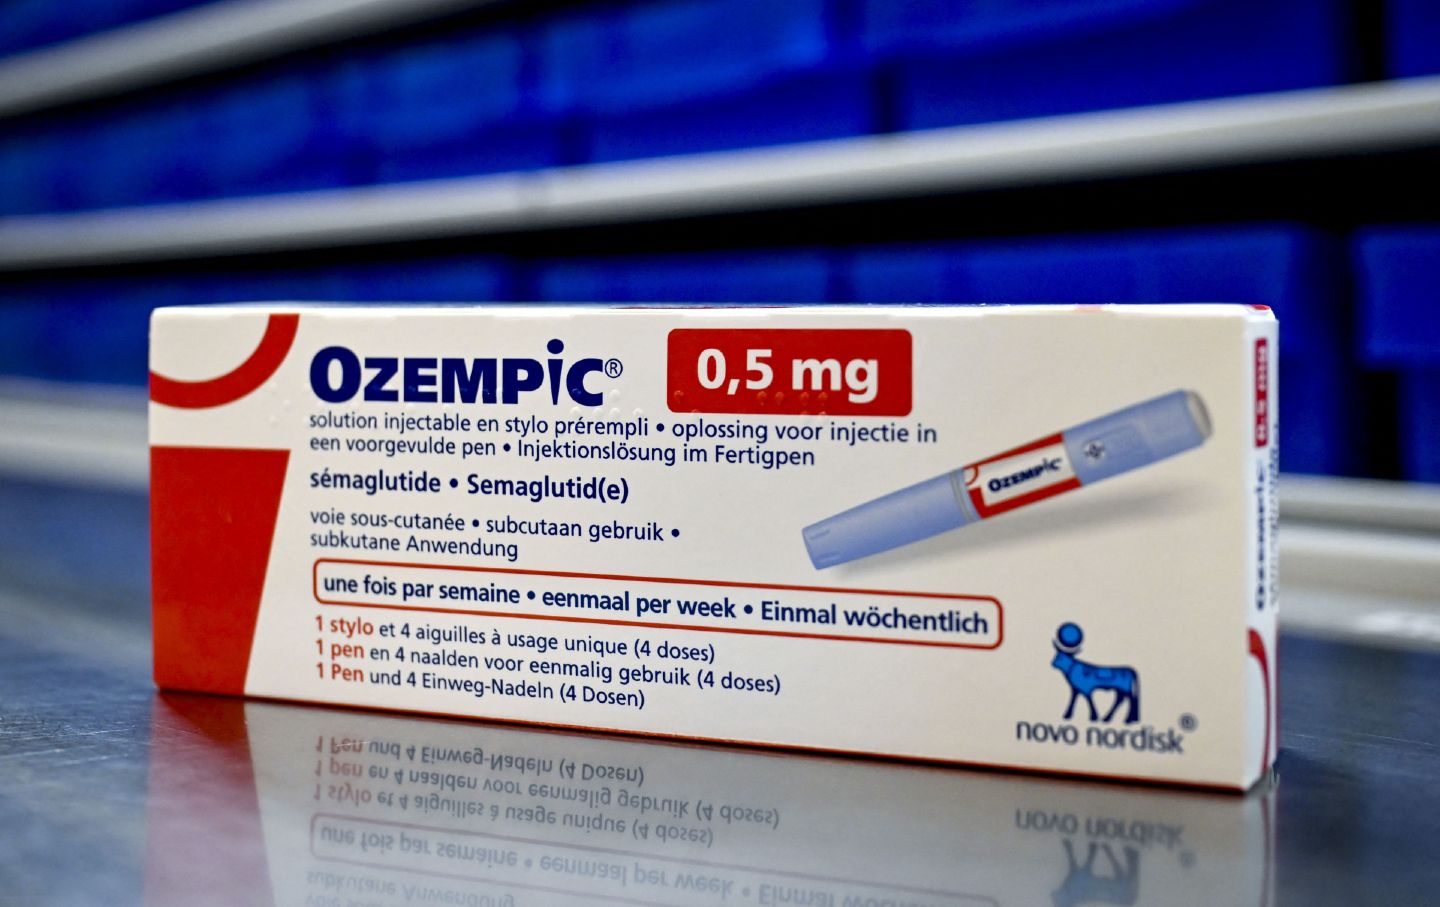 A package of Ozempic at a hospital in Bonheiden, Belgium.